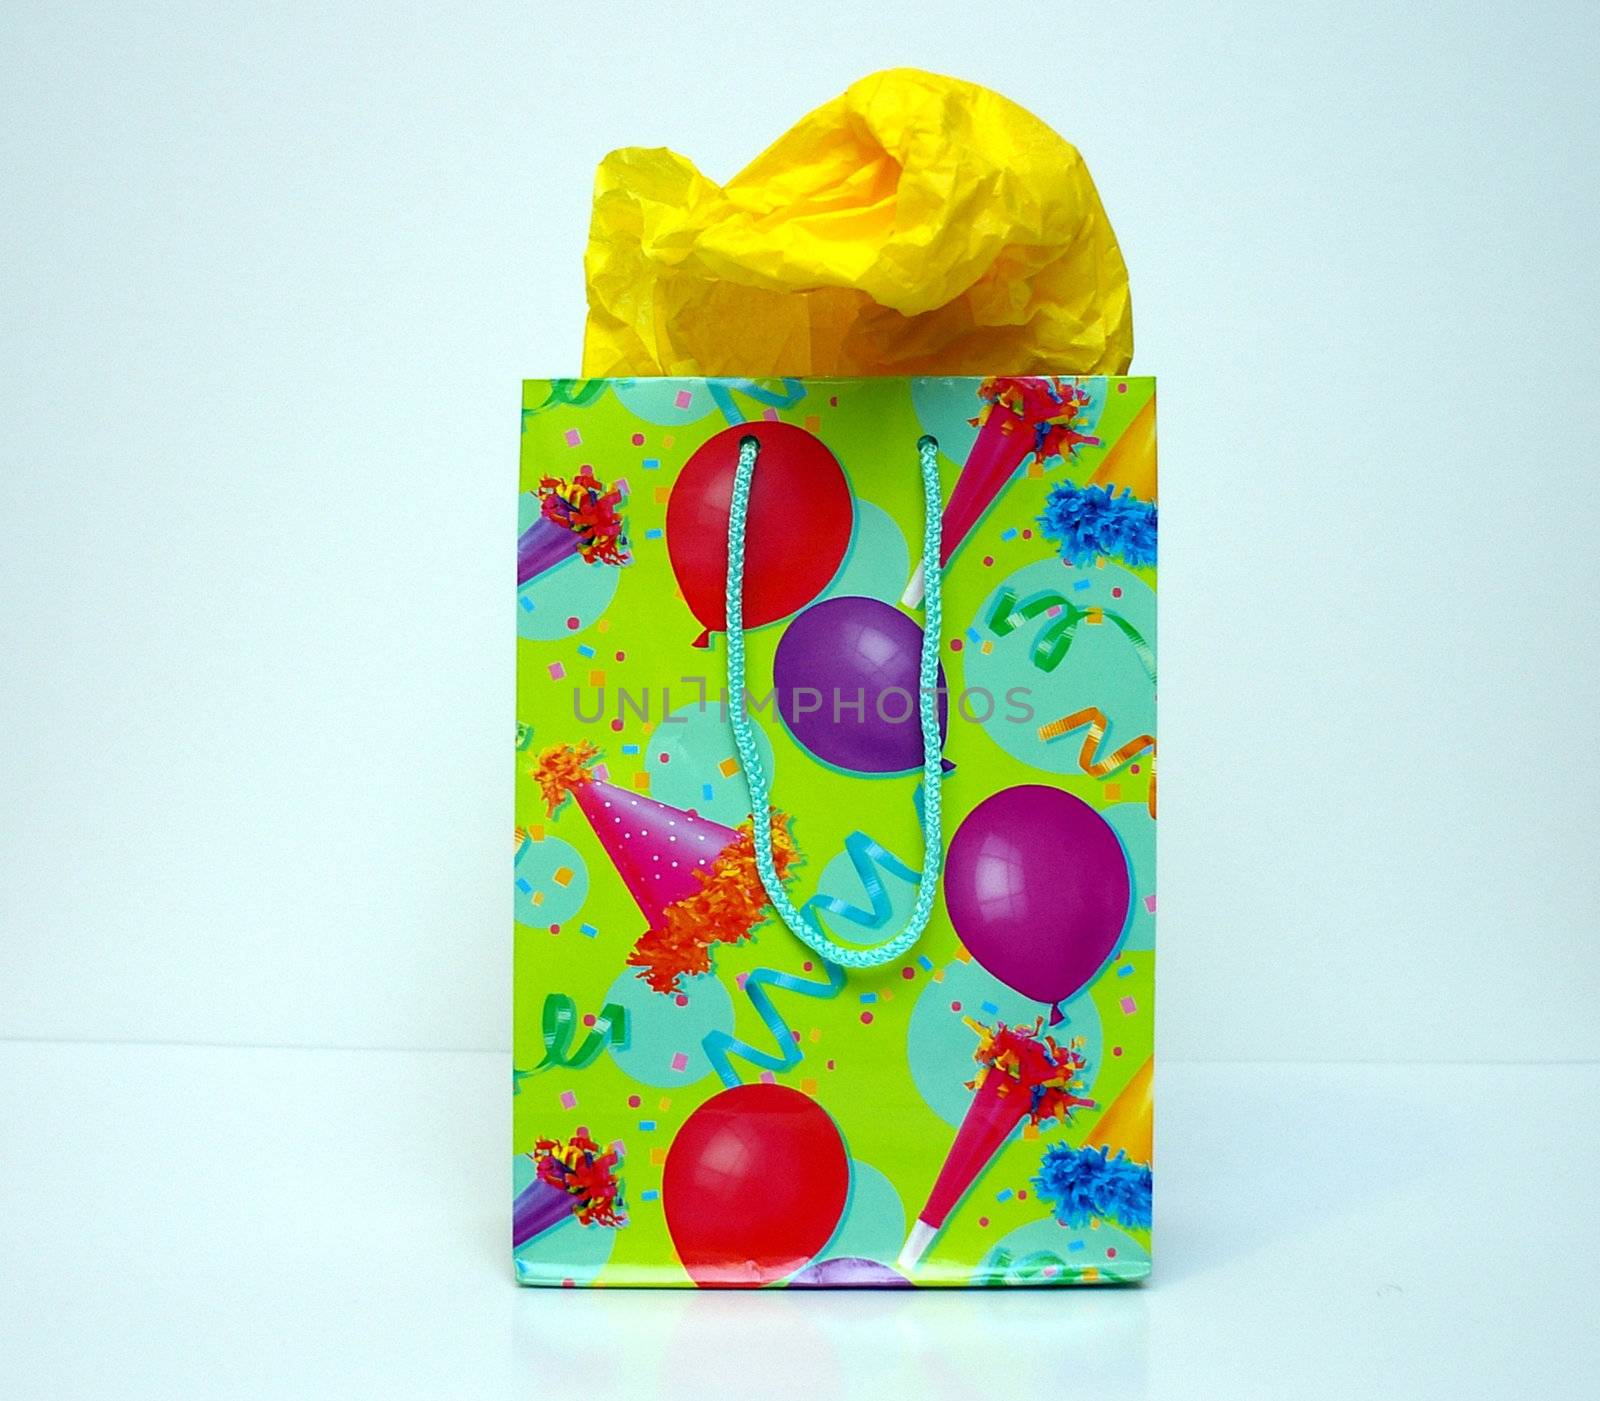 A gift bag for celebrations, Christmas or birthday gifts with tissue paper sticking out.